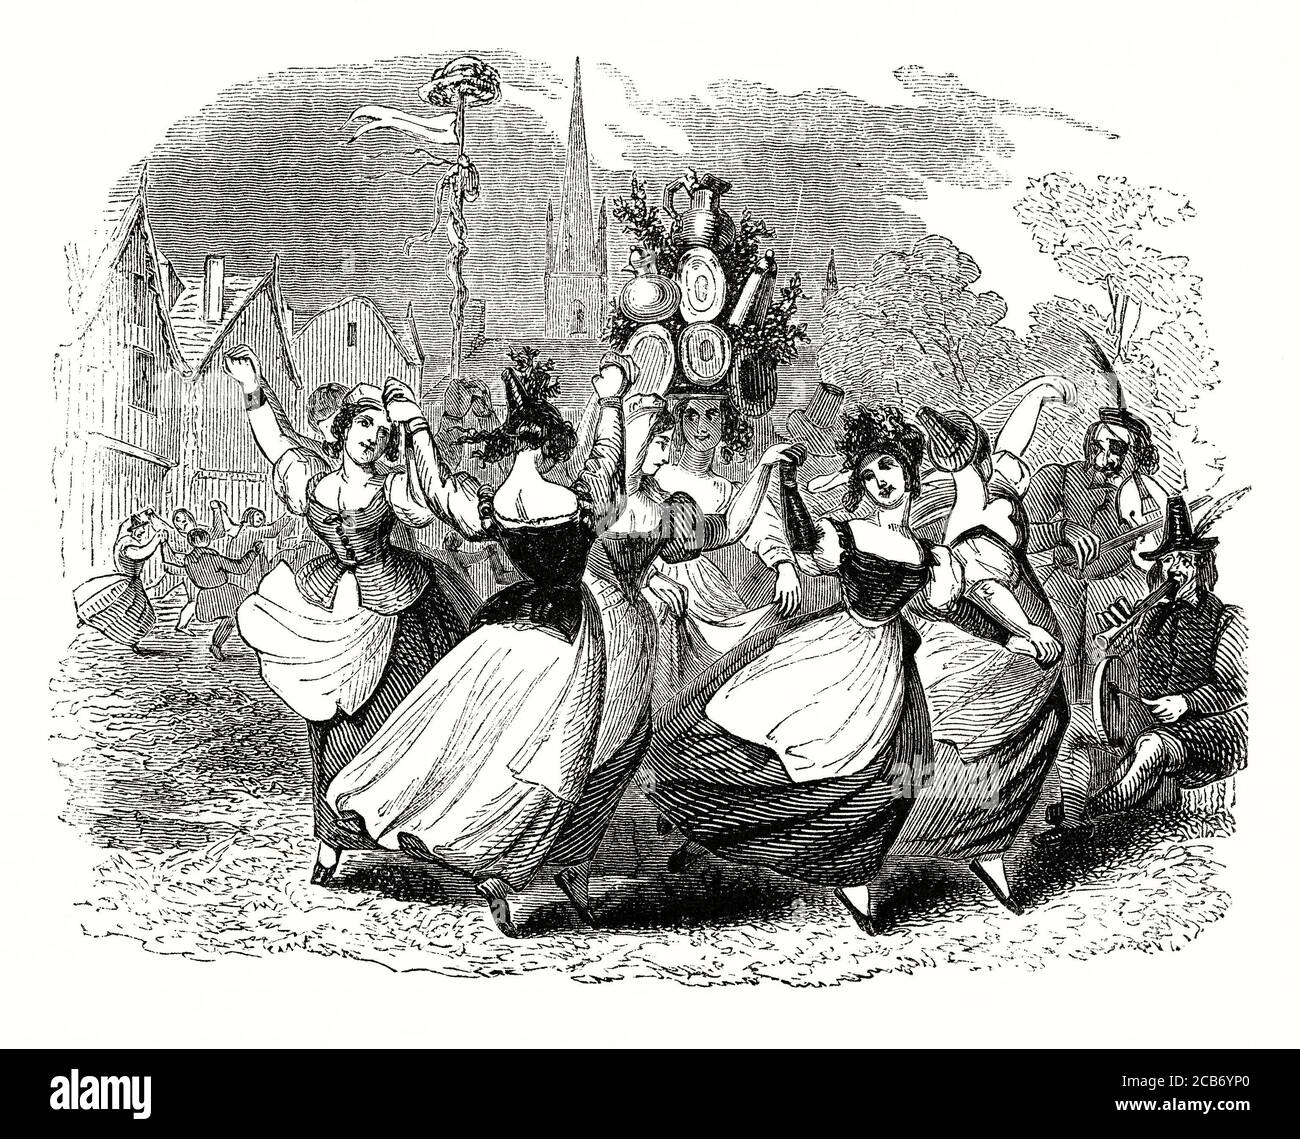 An old engraving of a May Day dance, the 'Milkmaids Garland', which was practiced until the early 19th century. The milkmaids would dress up in their best clothes and dance in the streets. A donation from passers-by was expected. A 'garland' (a pyramid of tankards, plates and flagons decorated with flowers) was paraded by the milkmaids or carried by a porter. May Day is an ancient public holiday usually celebrated on 1 May or the first Monday of May. It is a festival of spring. Dances, singing, and cake are usually part of the festivities. Stock Photo